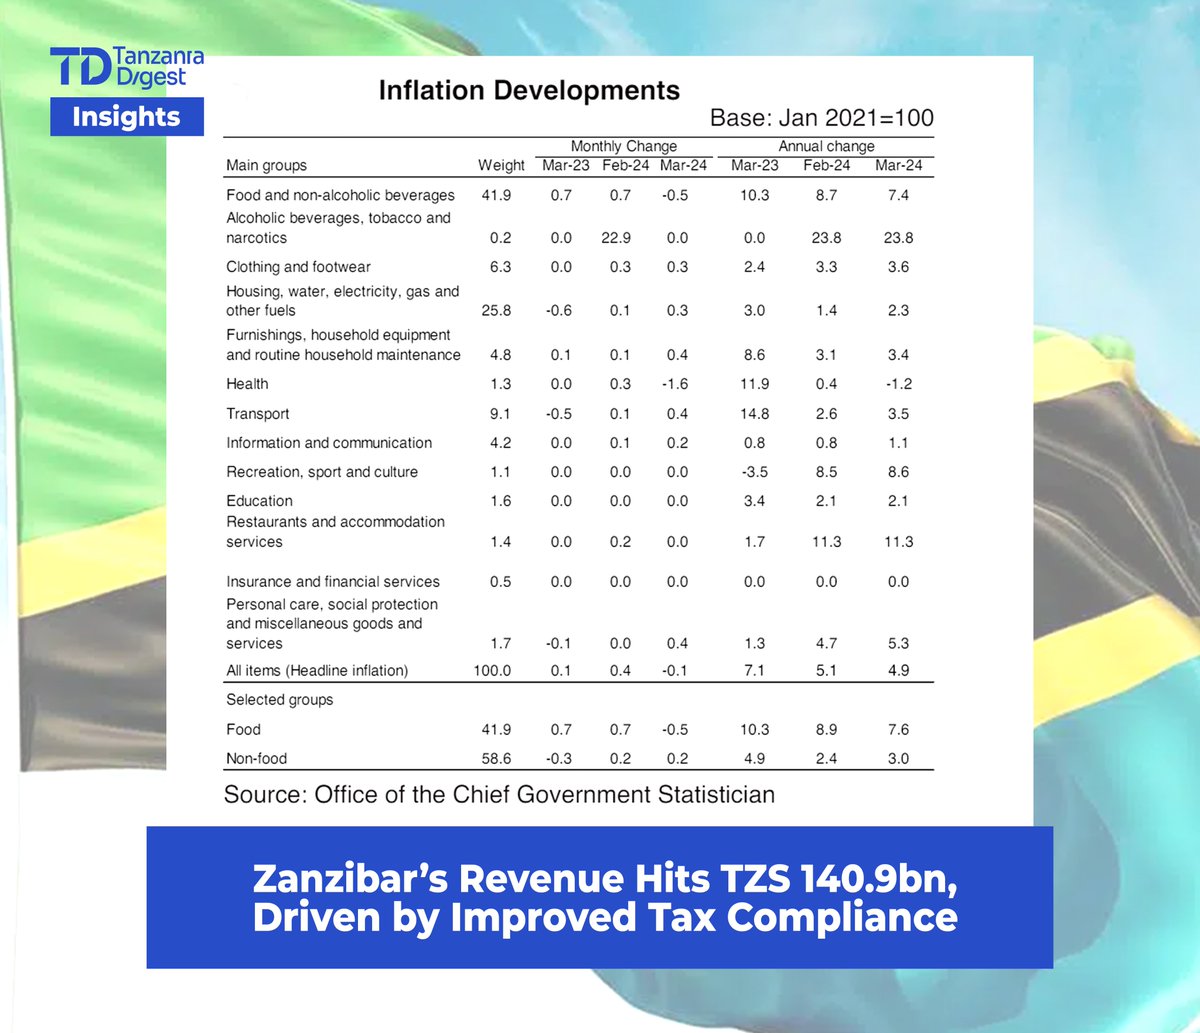 In March 2024, the government resource envelope totalled TZS 140.9bn, with TZS 135.6bn from domestic revenue and TZS 5.3bn from grants. Tax revenue was TZS 112.8bn, 3.8% below target, and non-tax revenue was TZS 22.8bn, 74.5% of the target. Improved tax administration and